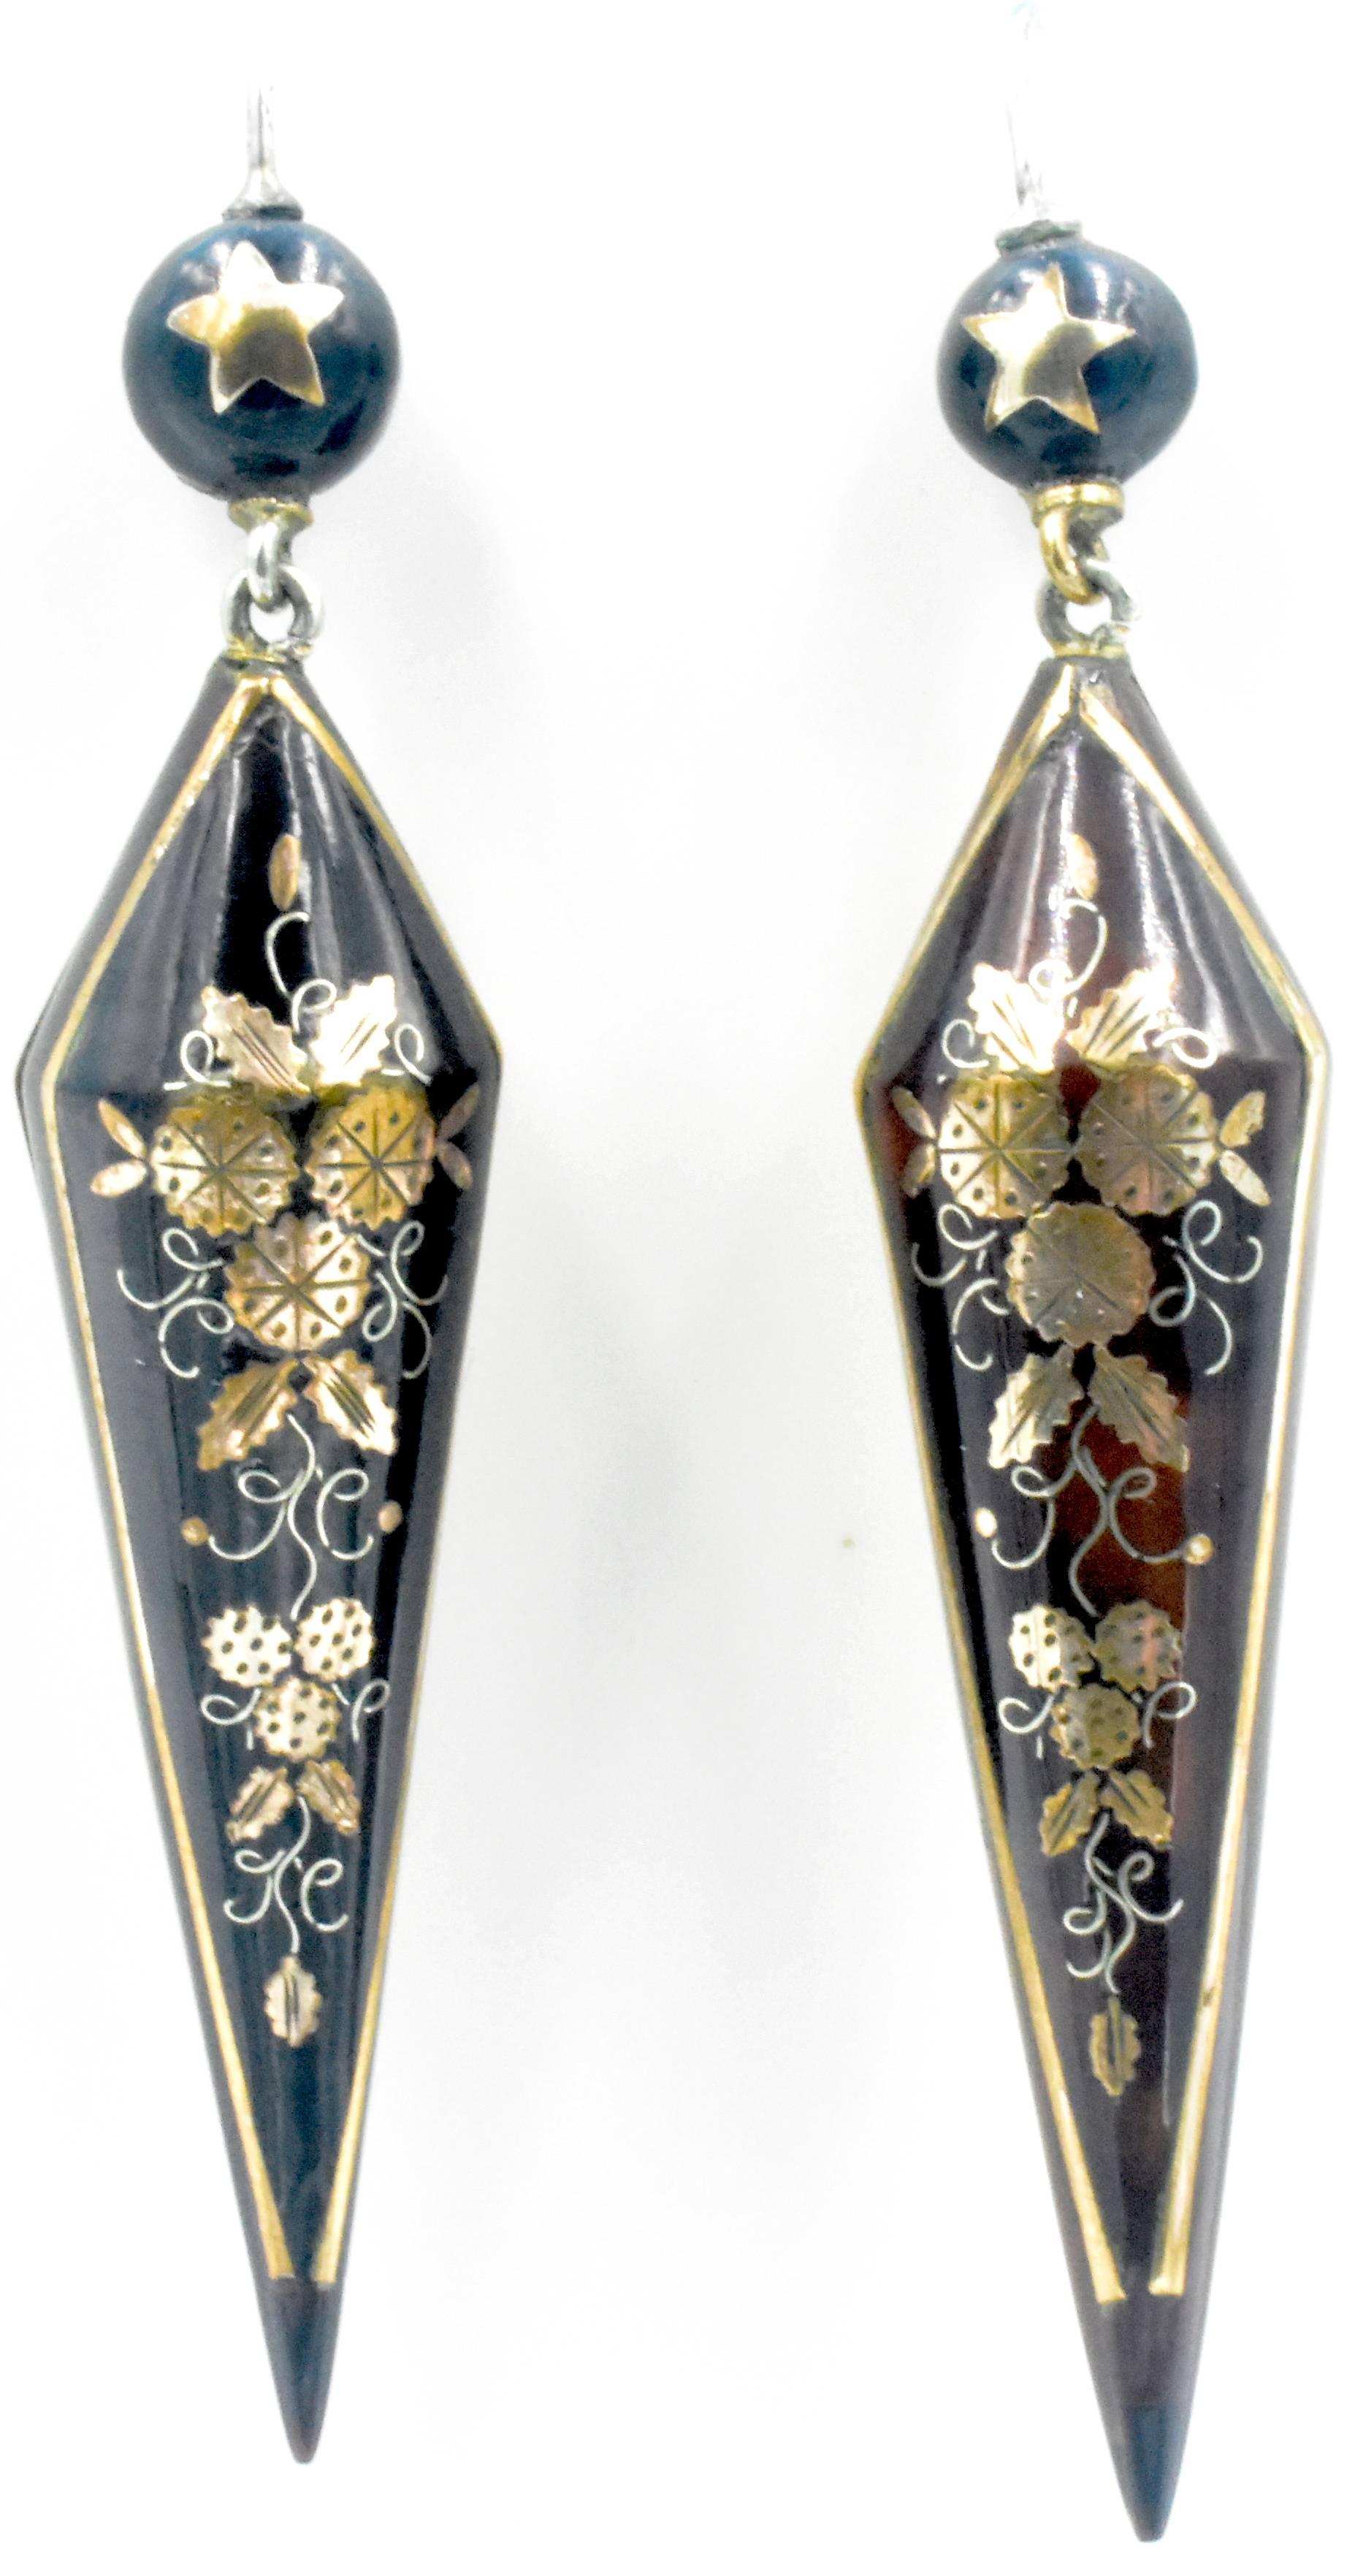 Elegant pique long drop earrings. Pique is tortoiseshell inlaid with gold and silver, a technique brought to England by the Huguenots when they were expelled from France in the 17th Century. This jewelry became very popular for its beauty and